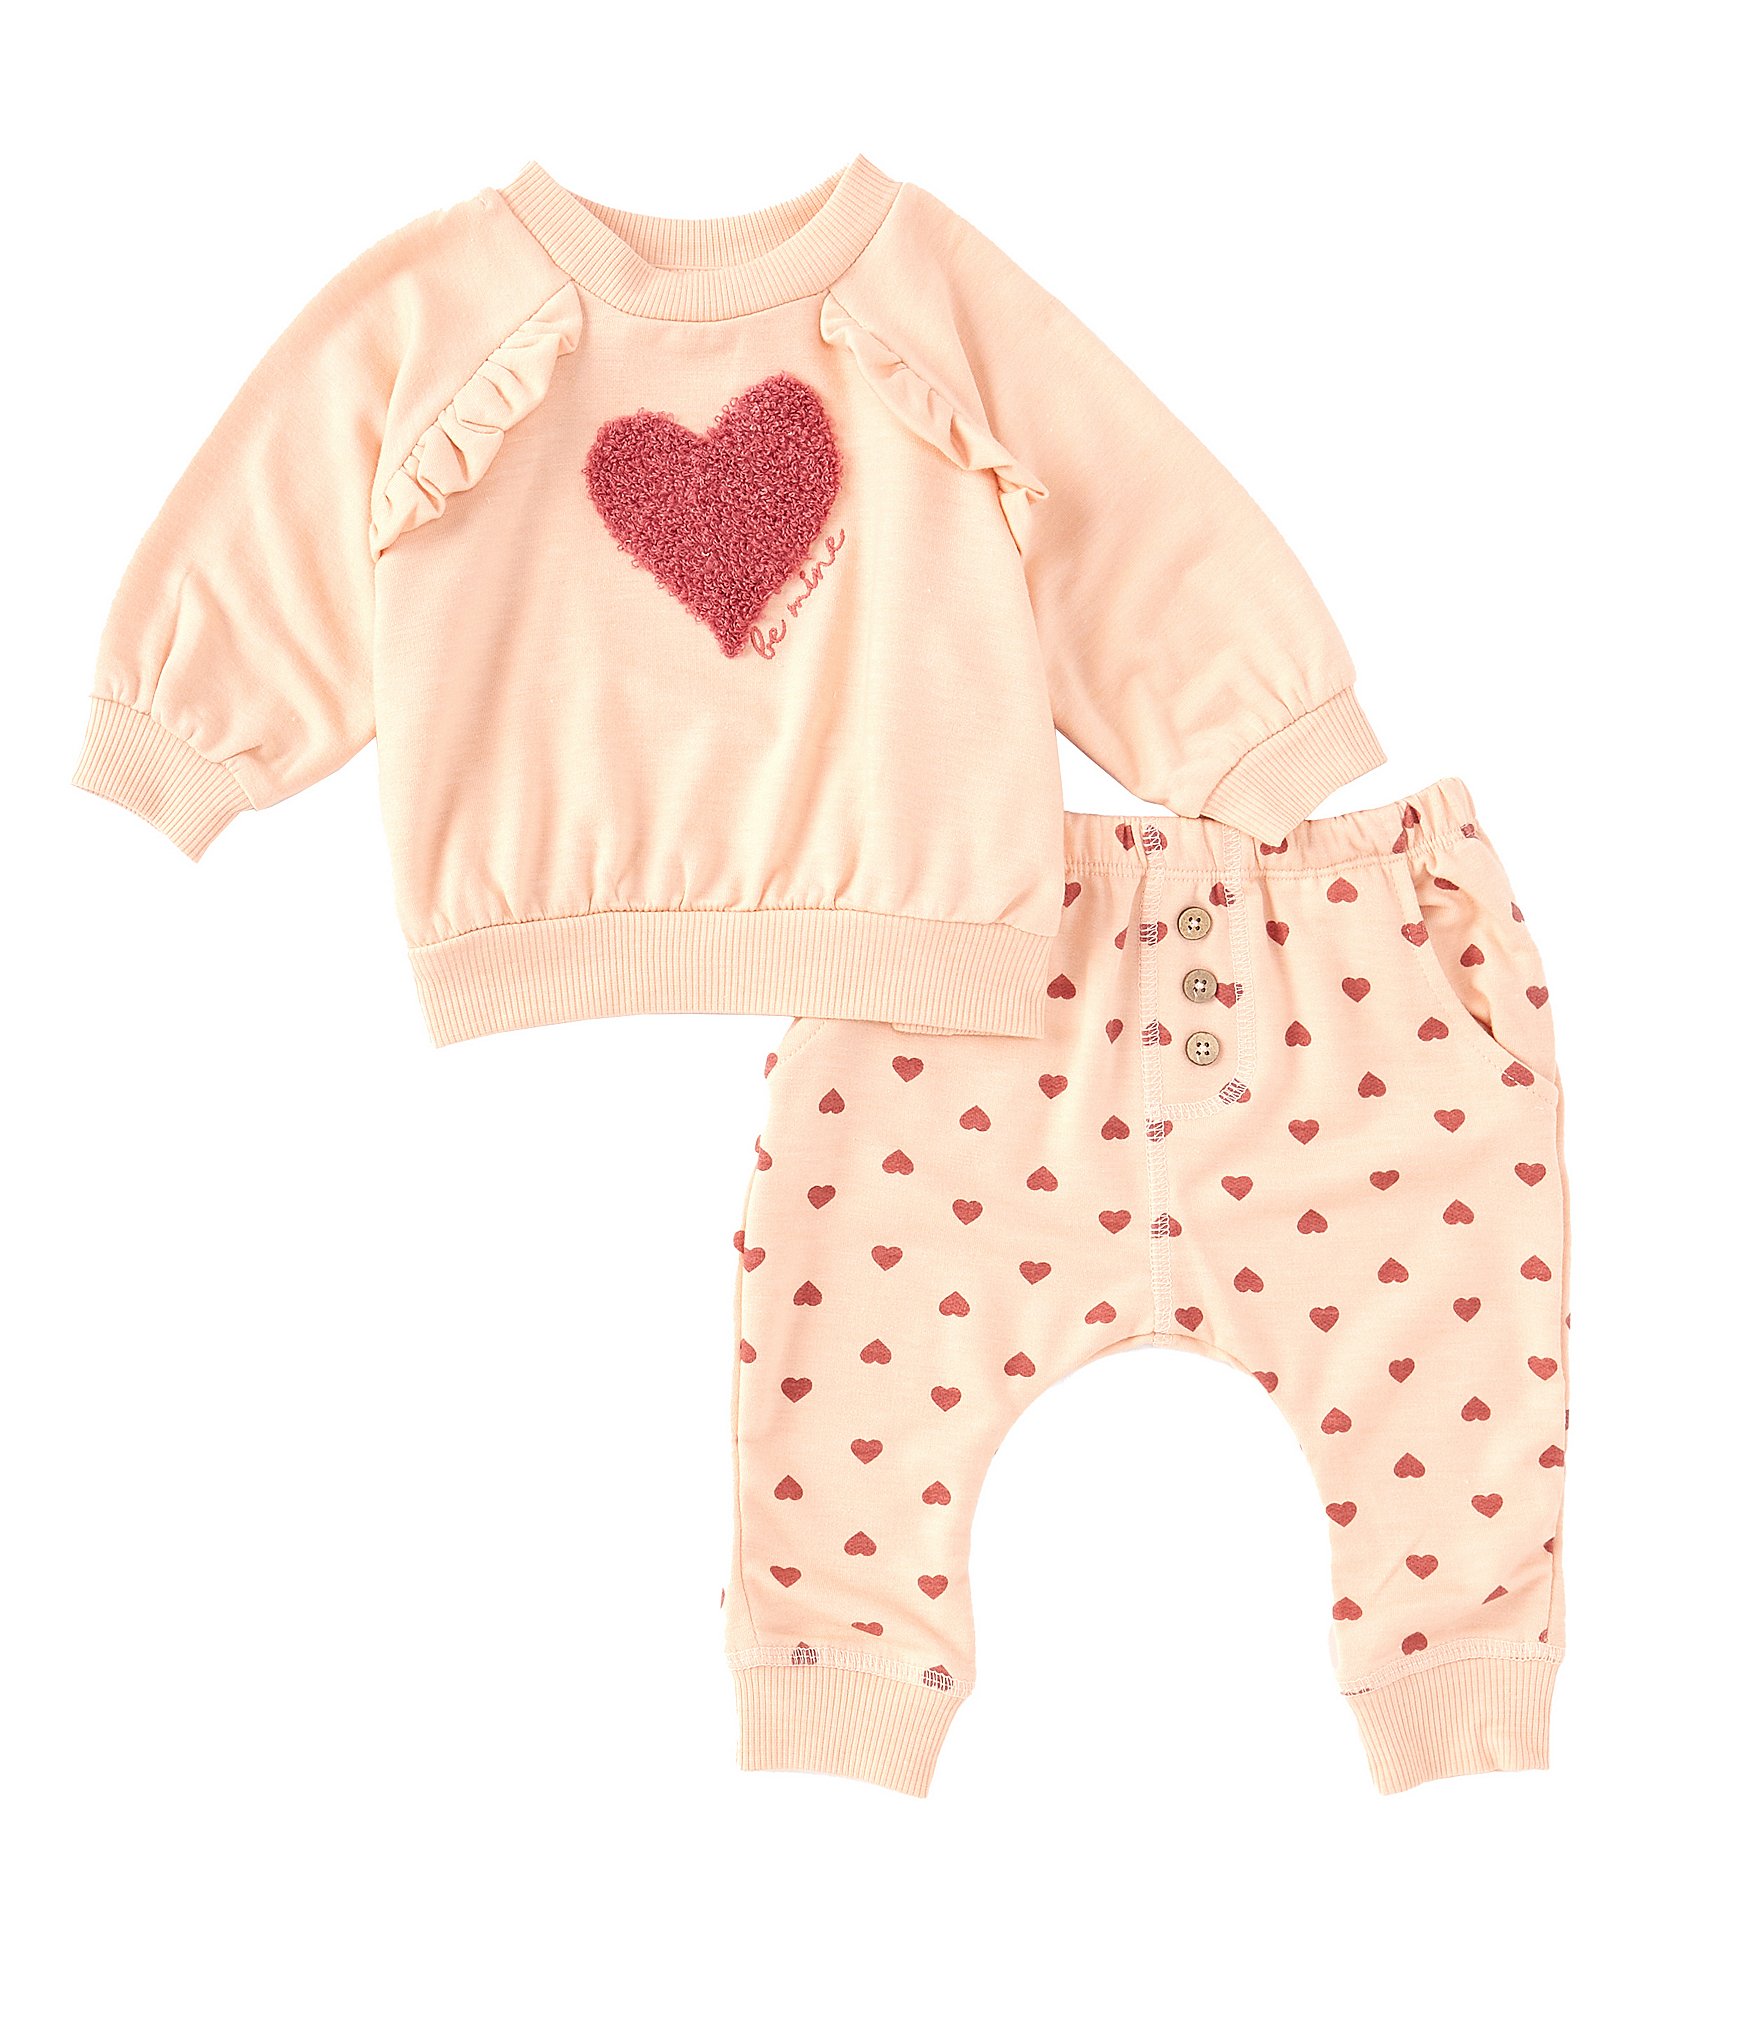 Jessica Simpson Baby Collection